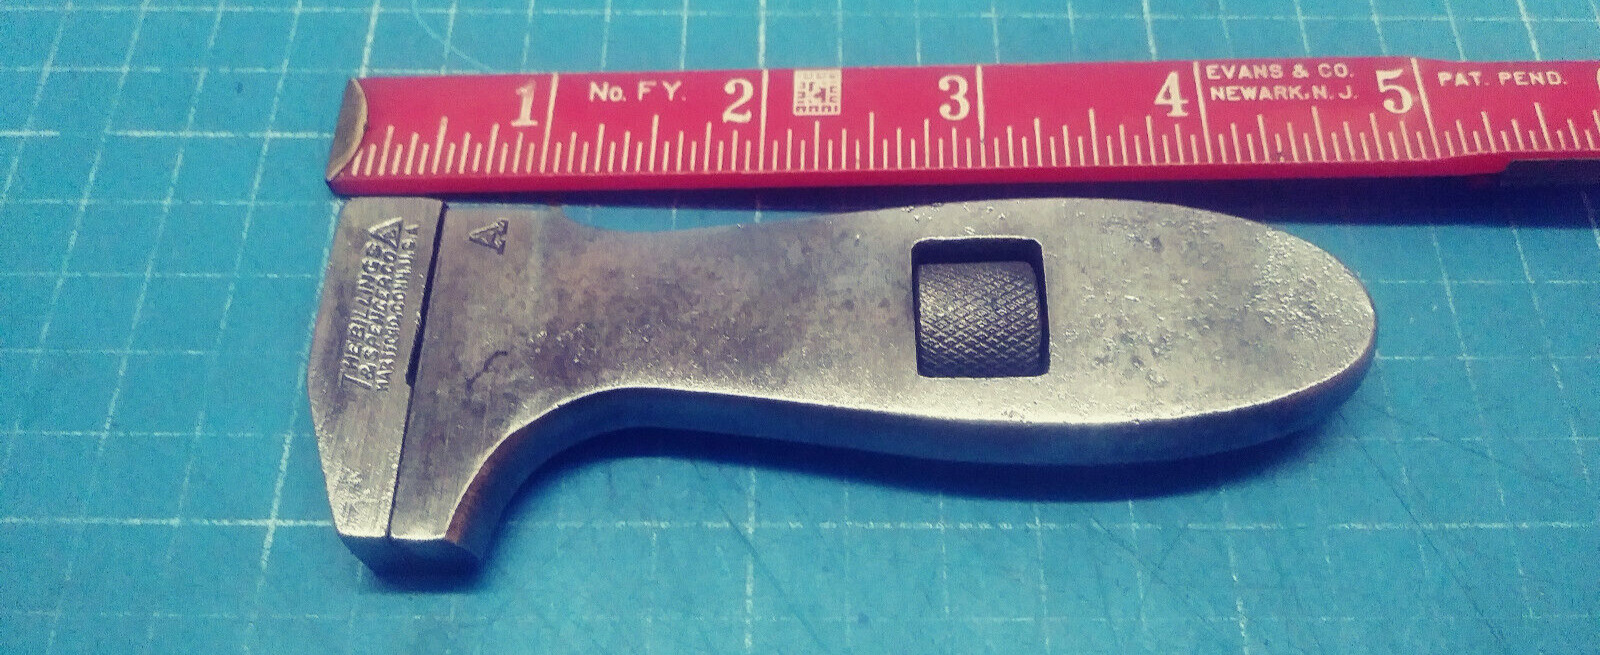 The BILLINGS SPENCER CO. Spanner Pocket Bicycle Wrench A 4”